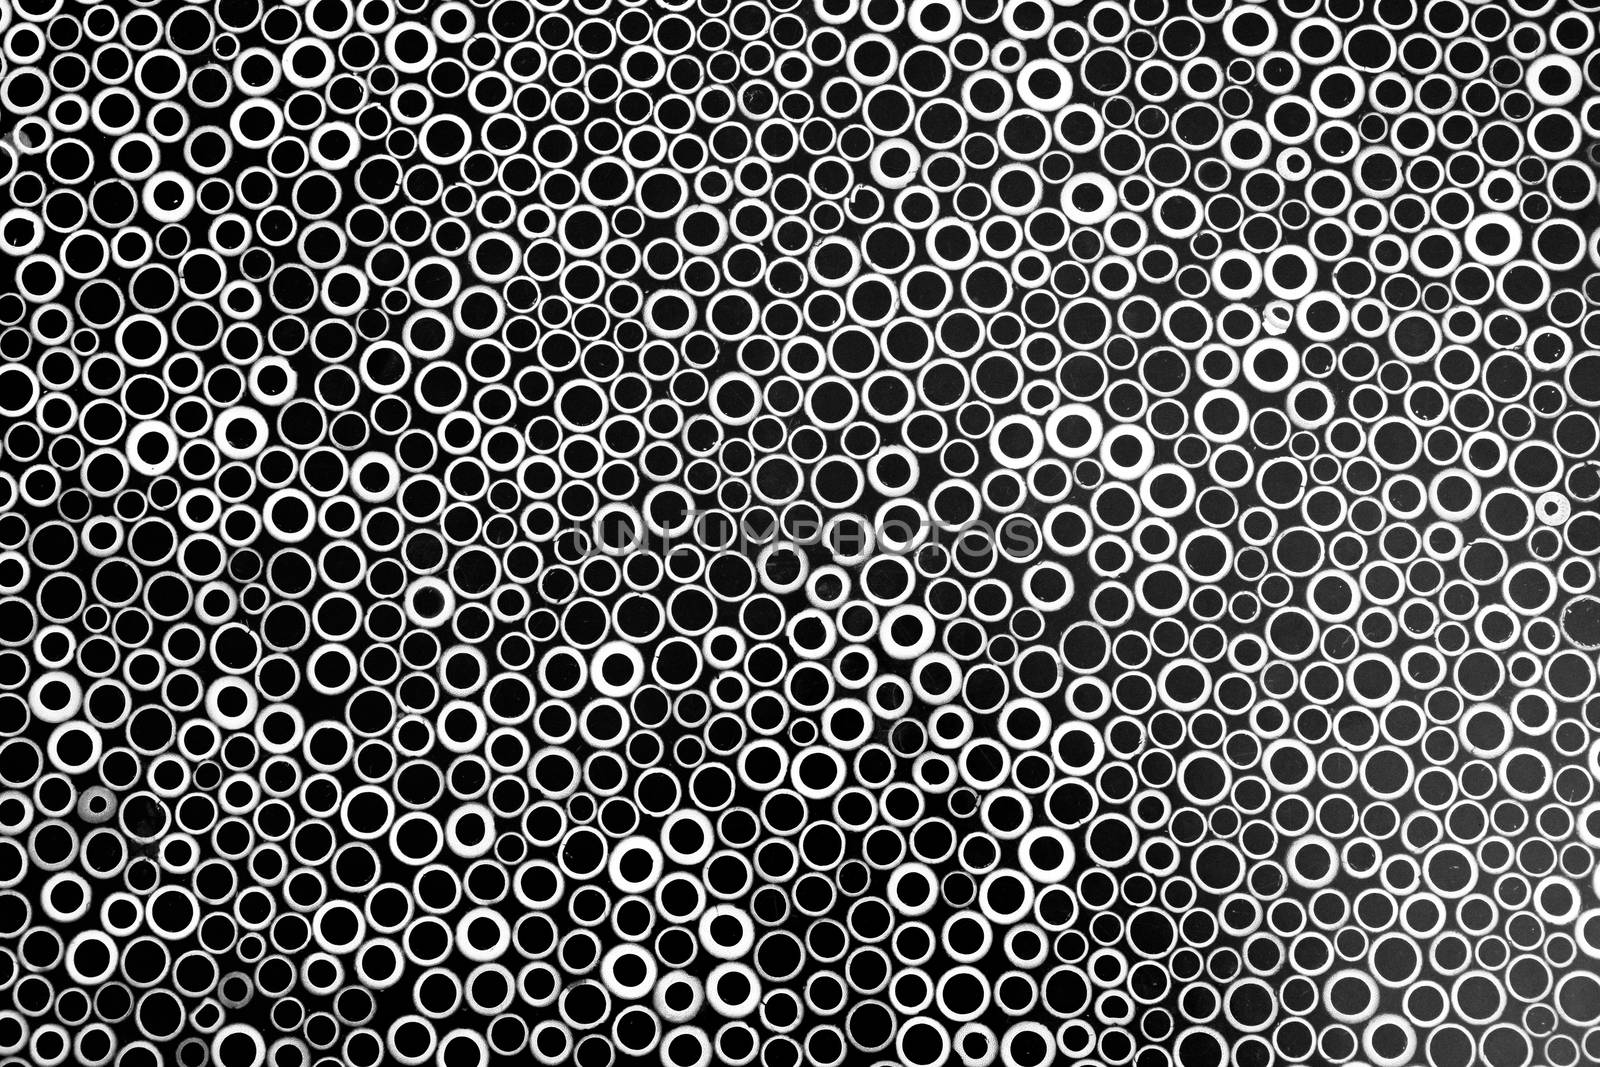 Abstract Black and white background bamoo circles